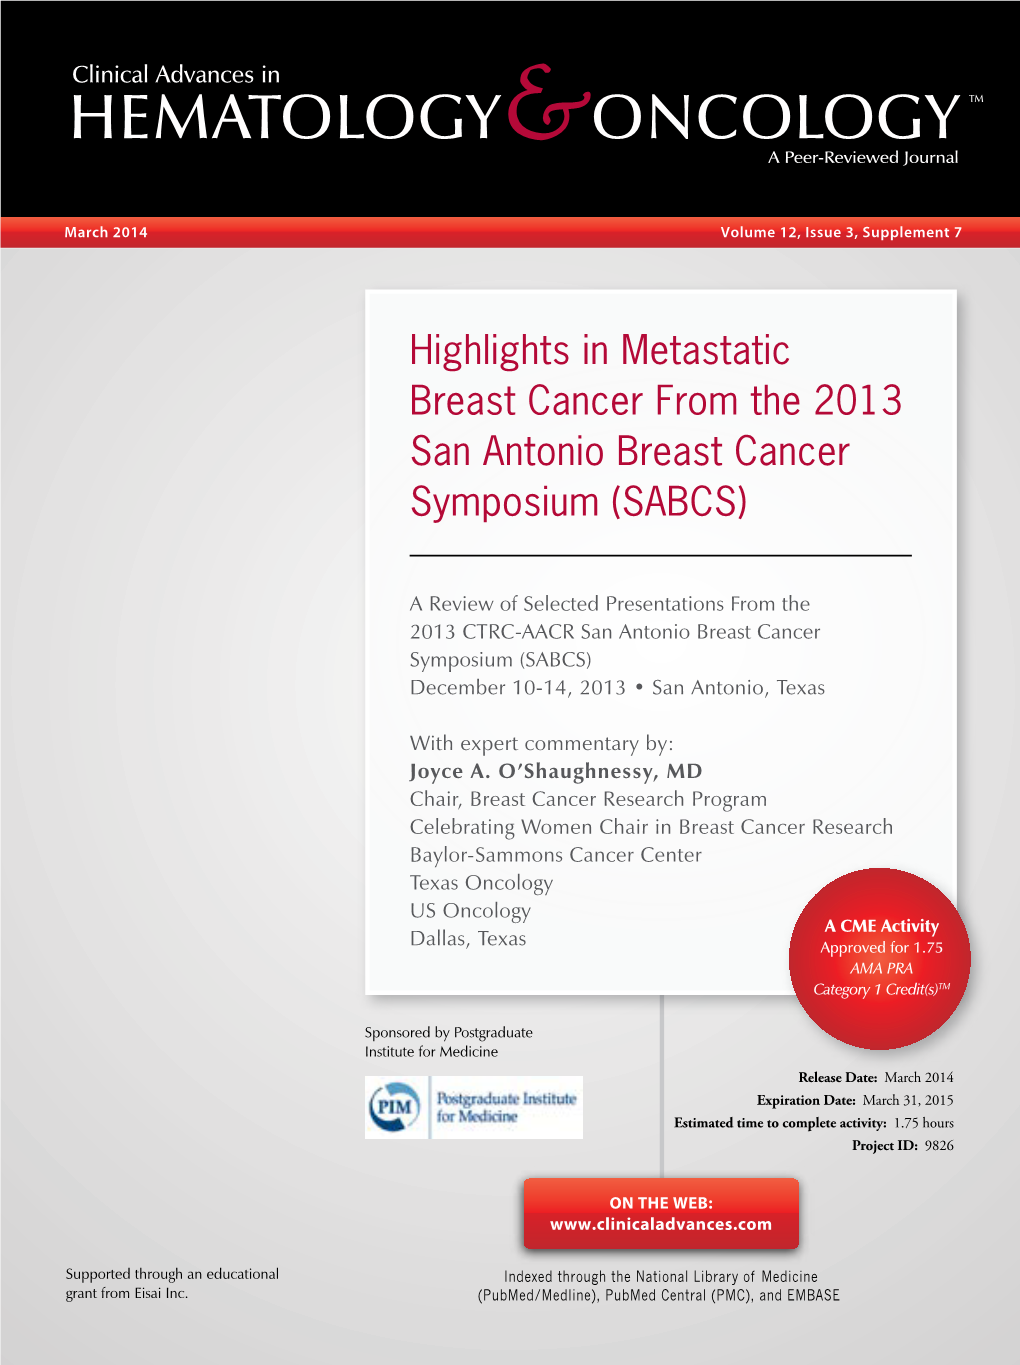 Highlights in Metastatic Breast Cancer from the 2013 San Antonio Breast Cancer